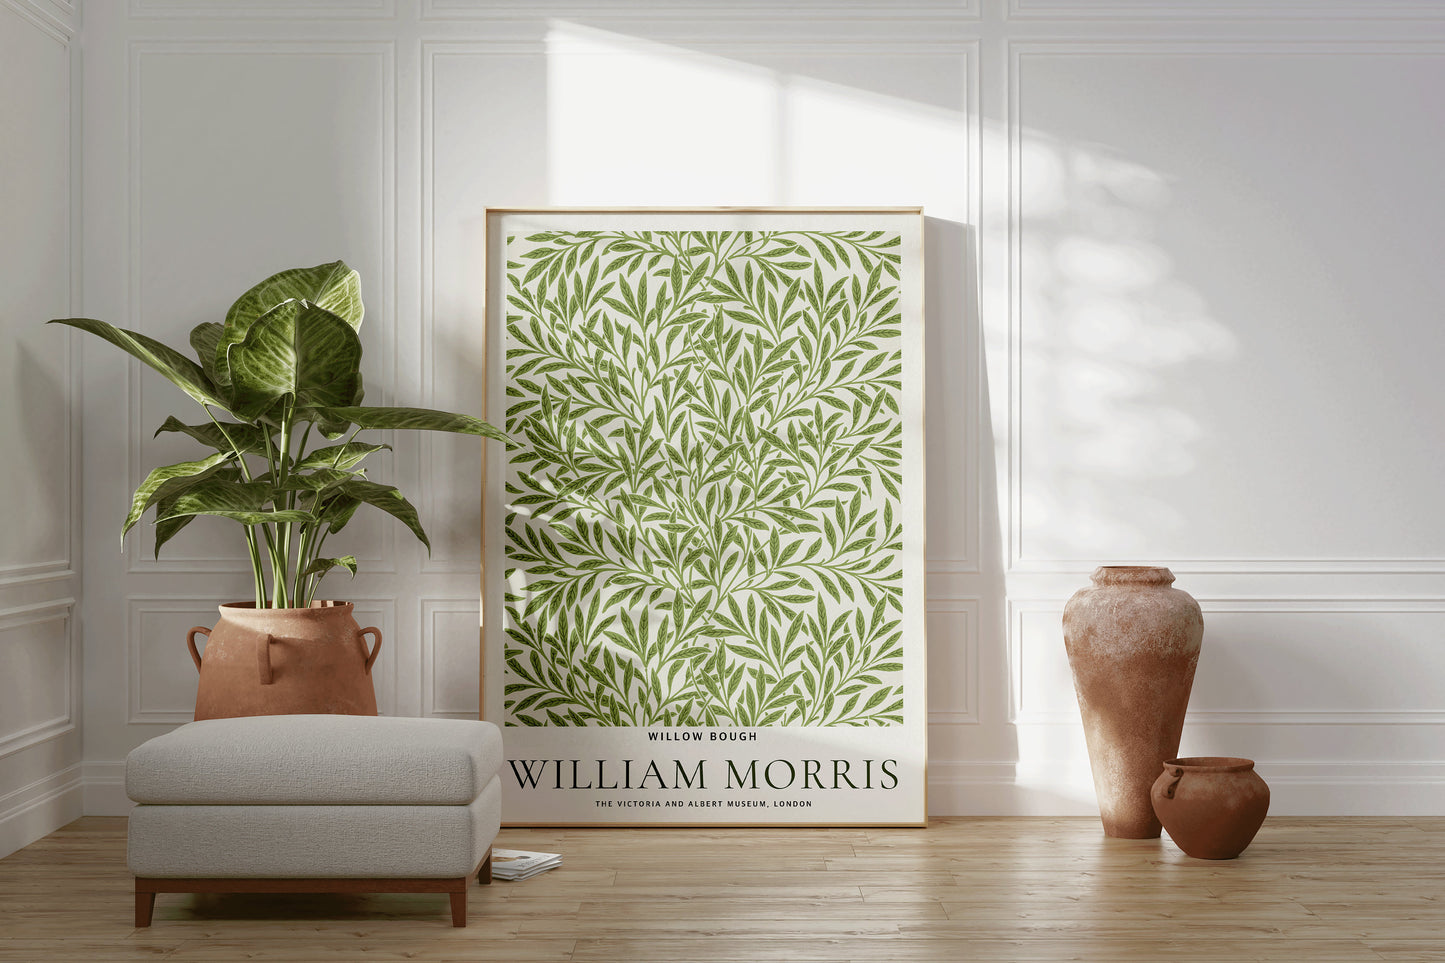 William Morris Willow Bough Poster Exhibition Museum Art Print Nouveau Morris Flower Market Ready to hang Framed Home Office Decor Gift Idea